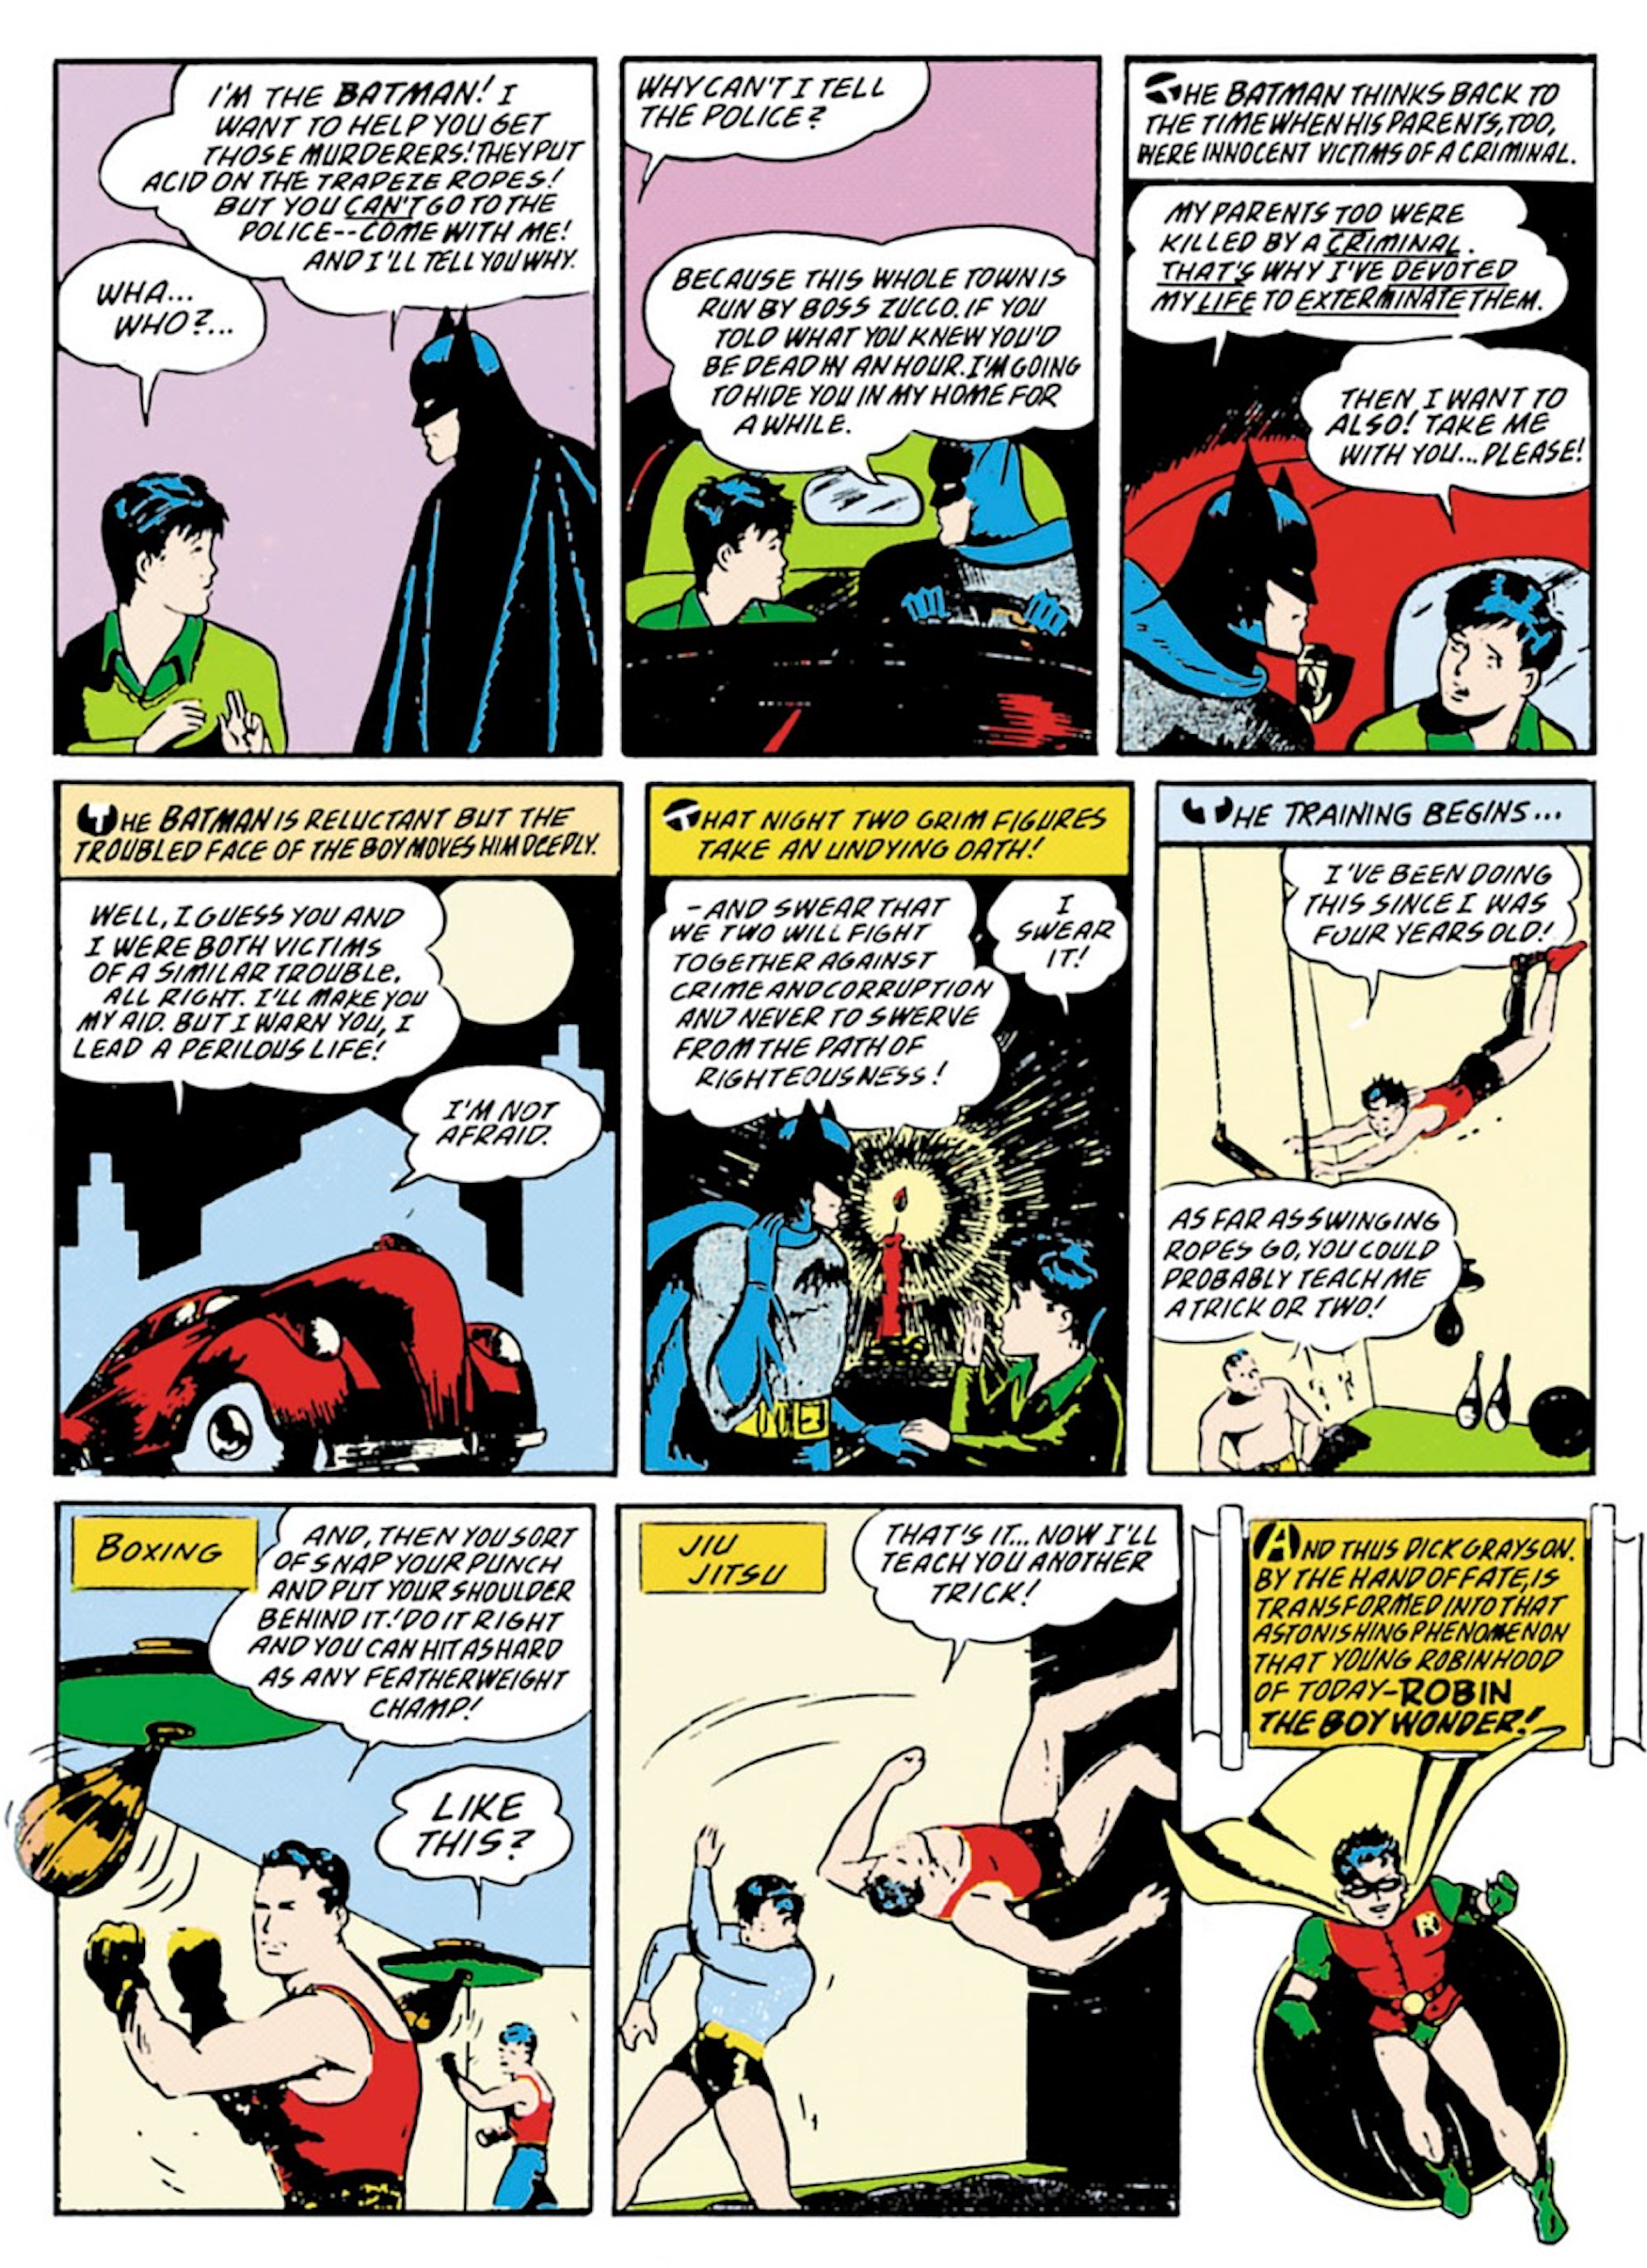 The First Origin of Robin’s Name is Still The Best Explanation